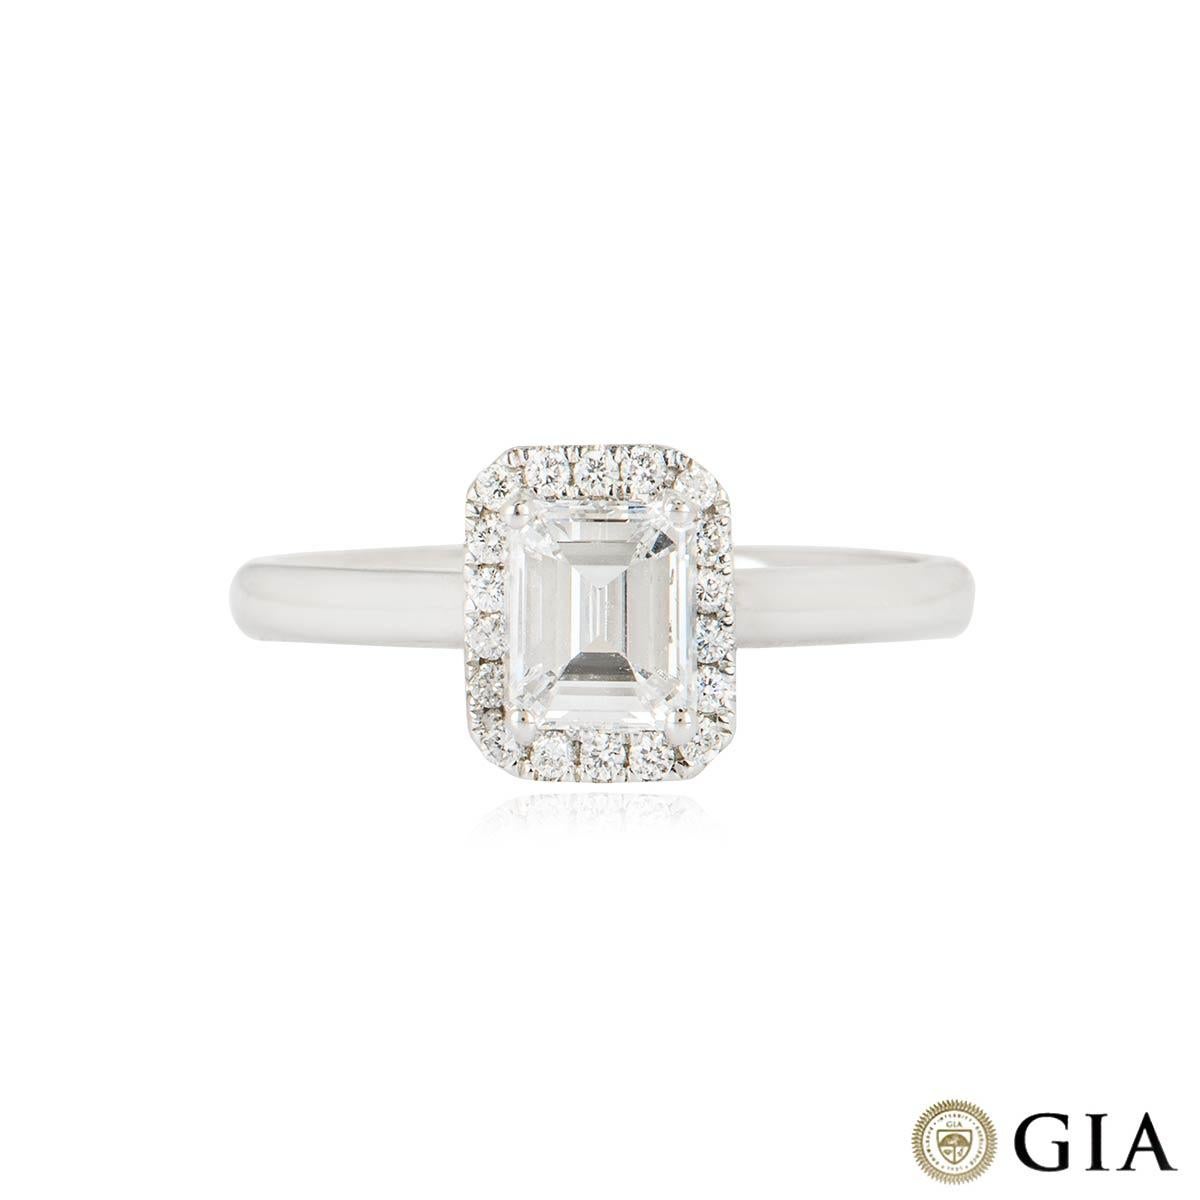 GIA Certified Emerald Cut Diamond Engagement Ring 0.74 Carat D/VS2 In Excellent Condition For Sale In London, GB